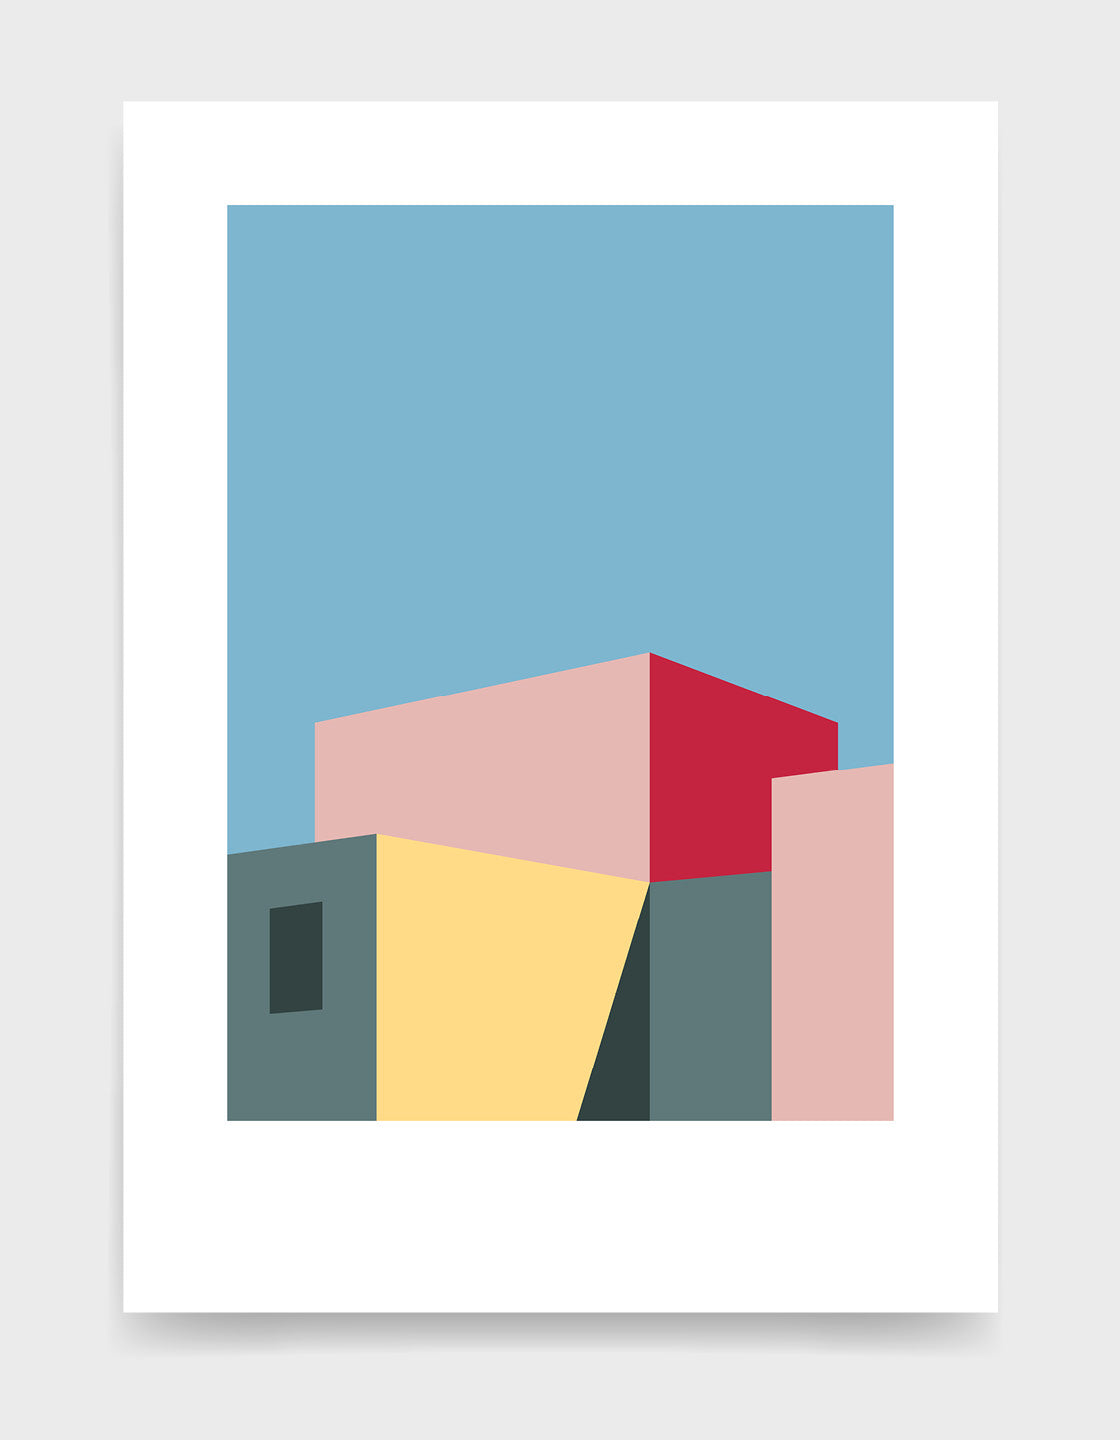 Geometric abstract art print depicting a building in shadow